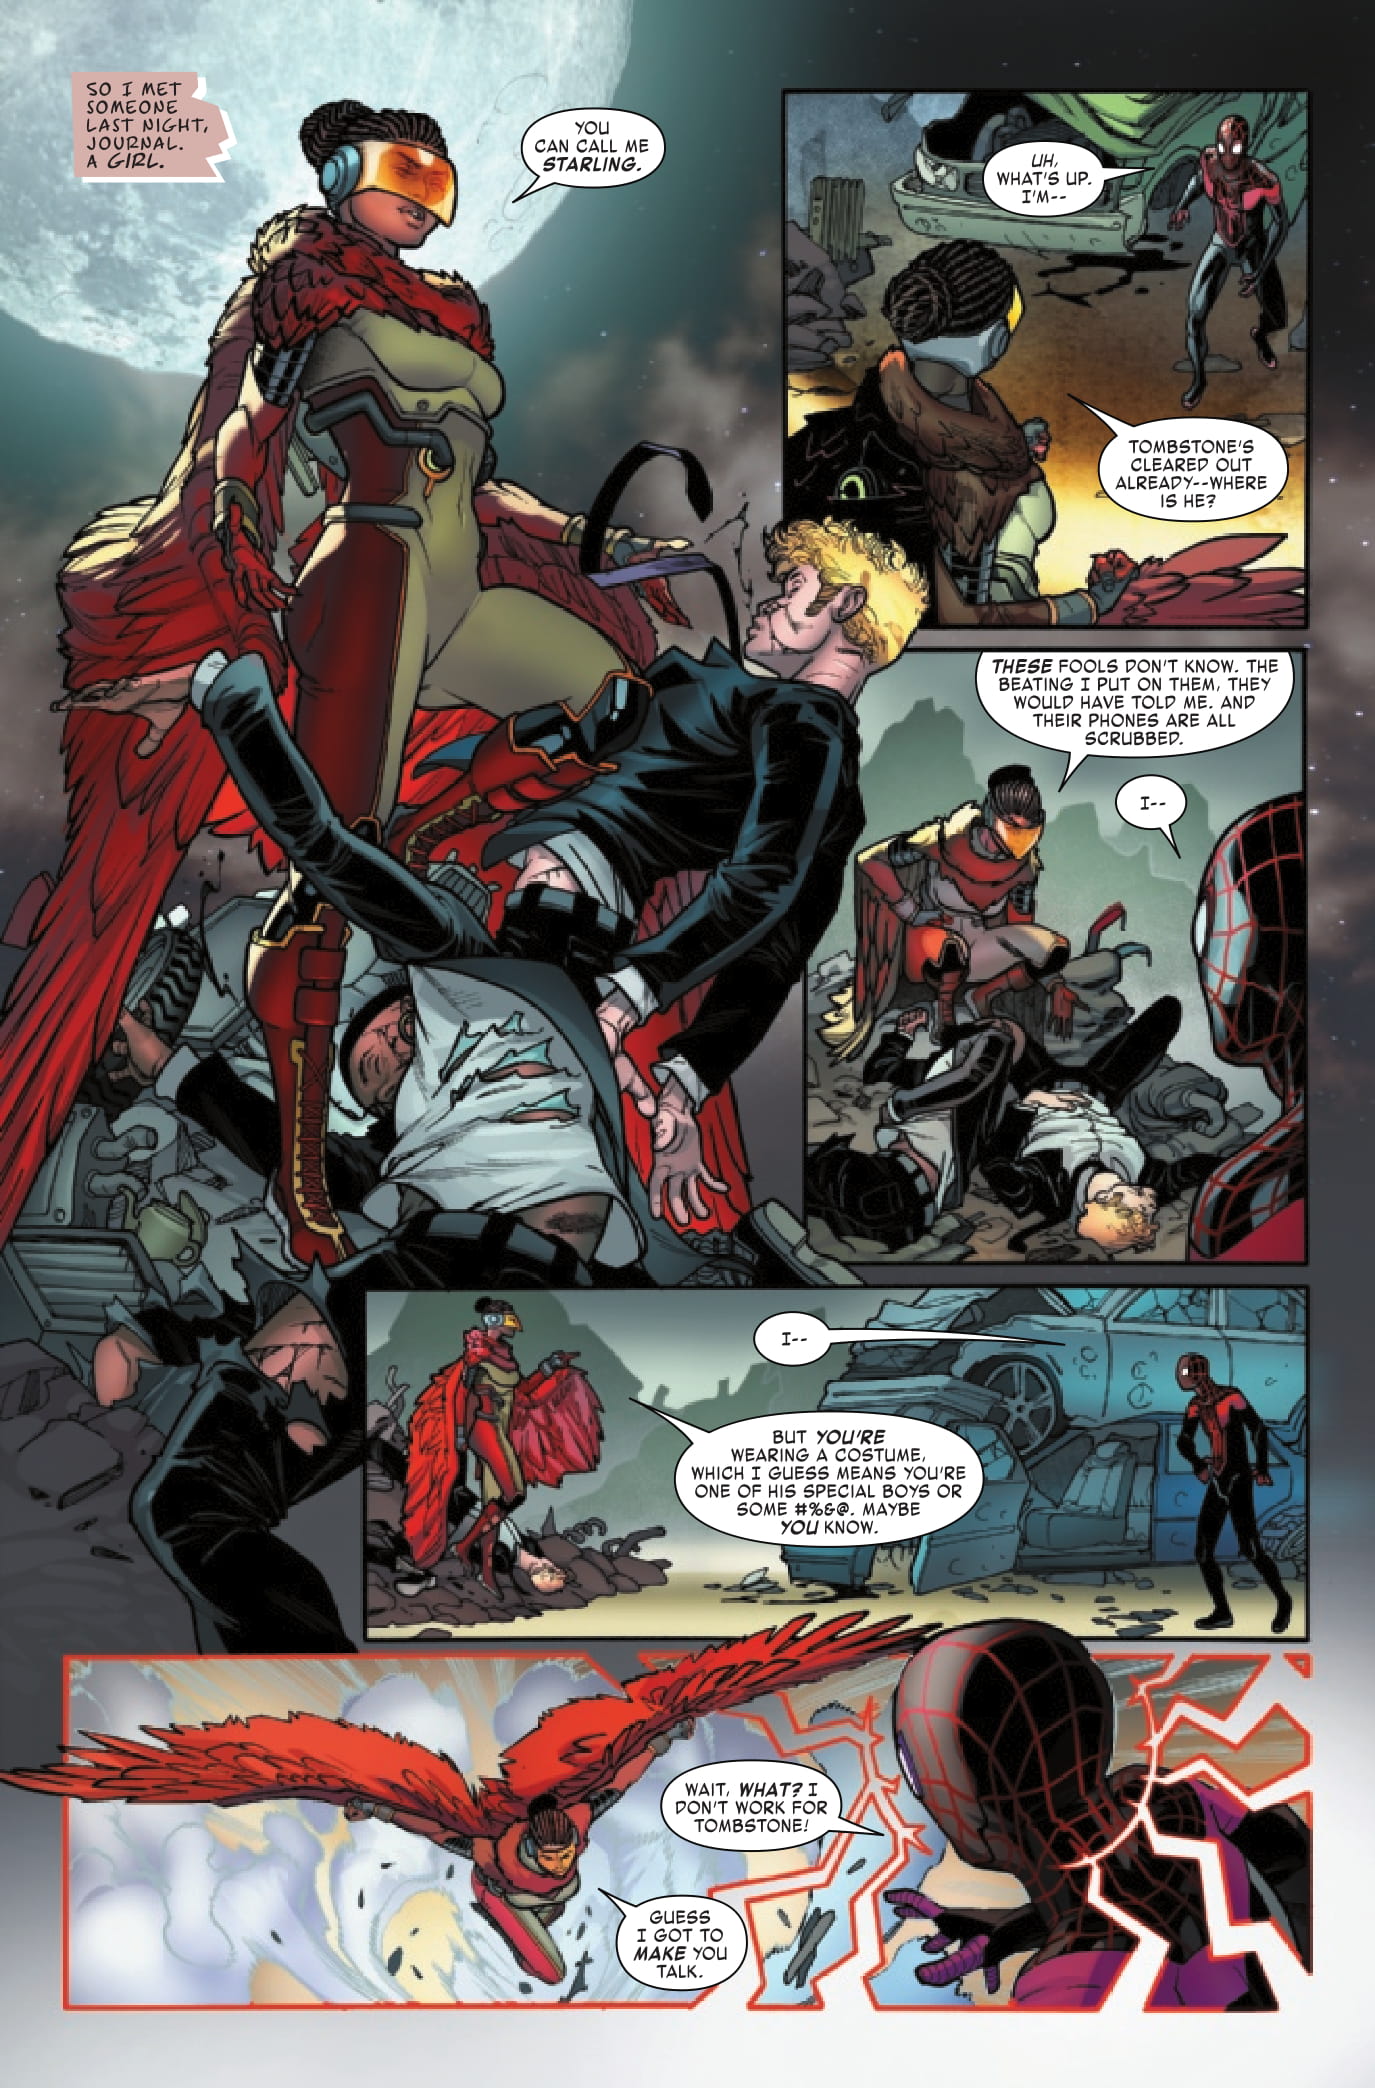 Miles Morales #6 preview page 1